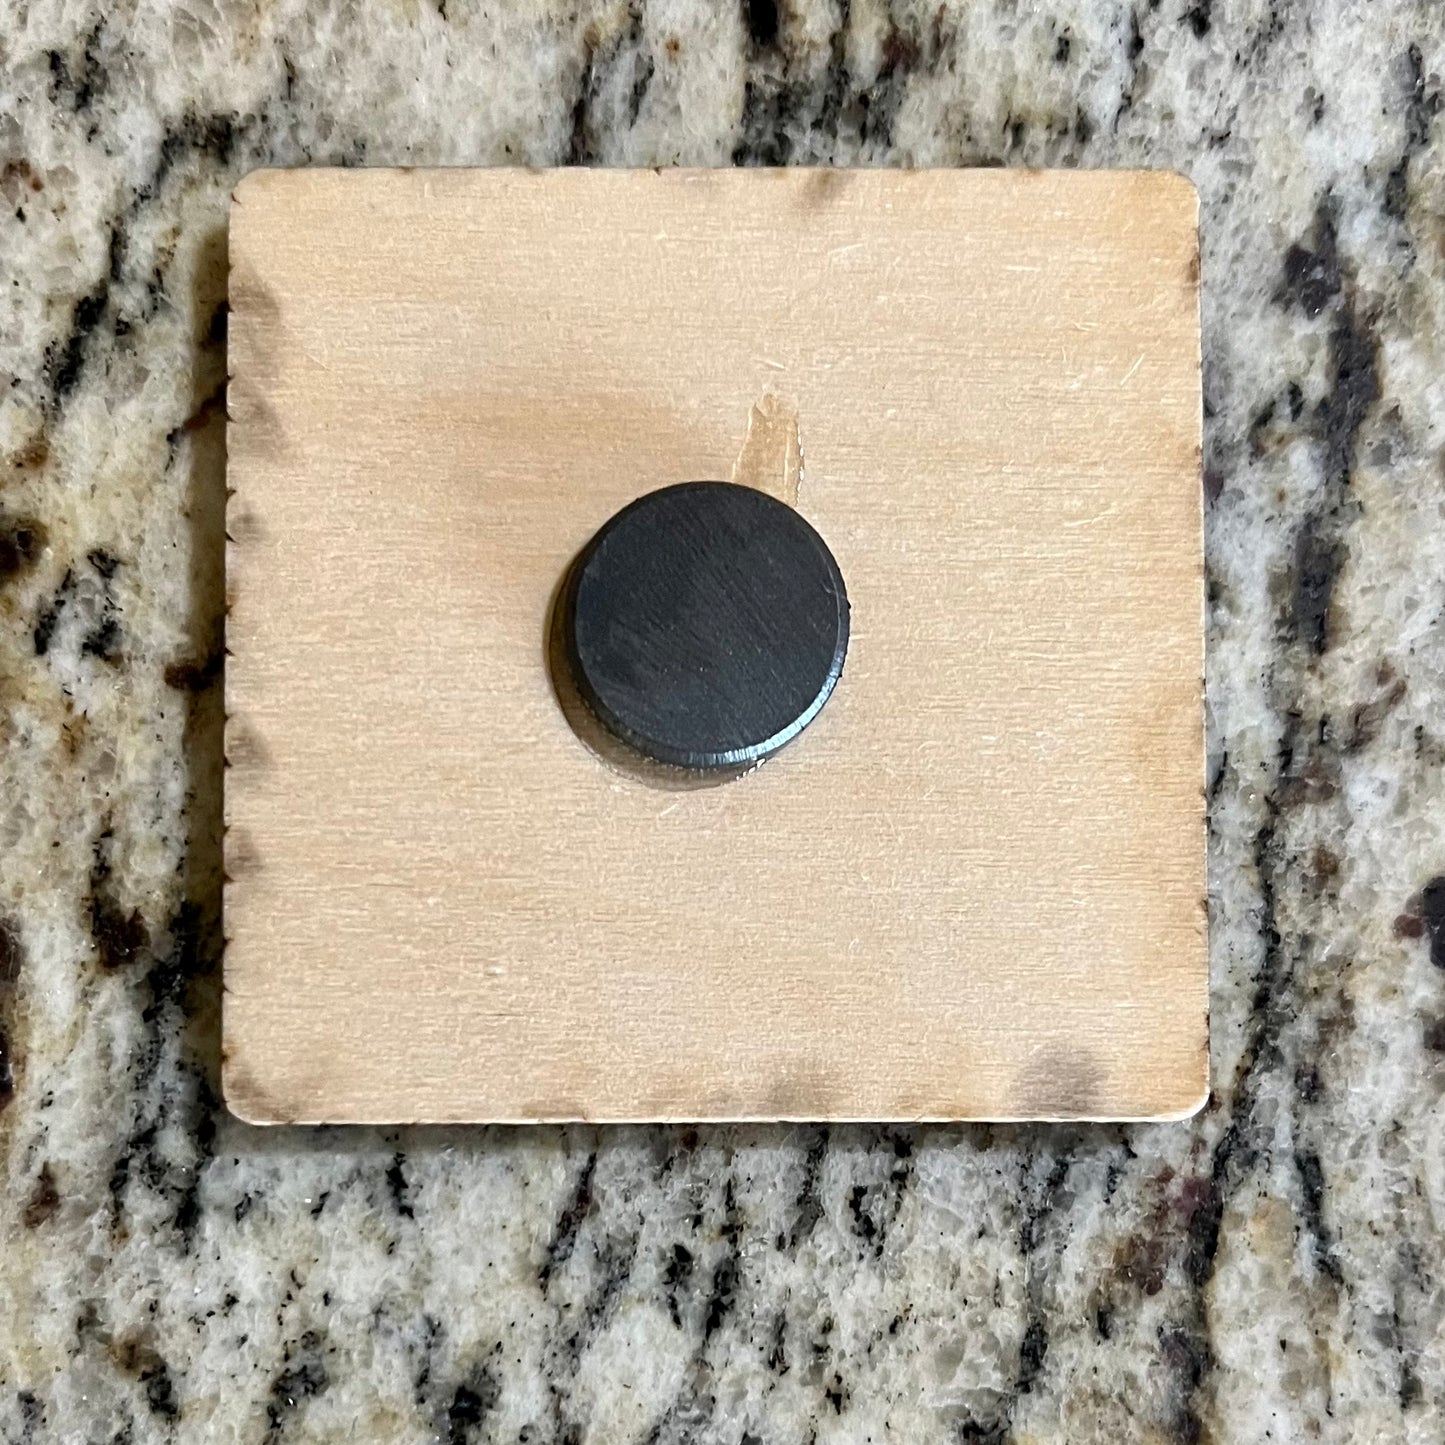 Back of fridge magnet, approximately 2”x2” with centered round magnet